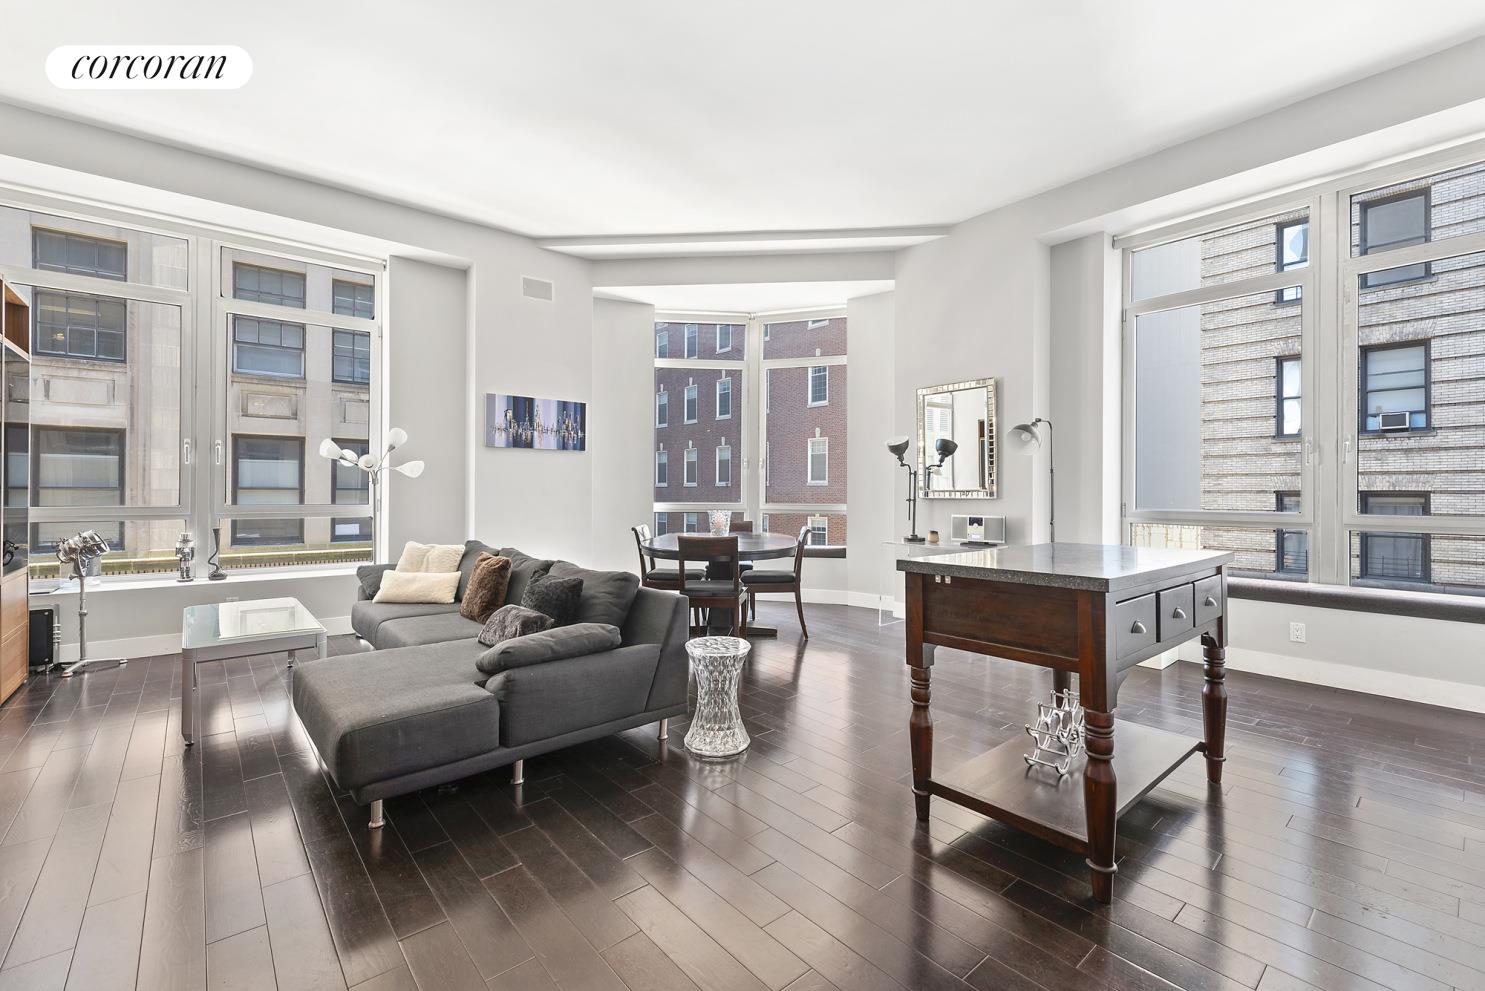 111 Fulton Street 514, Lower Manhattan, Downtown, NYC - 2 Bedrooms  
2 Bathrooms  
3 Rooms - 